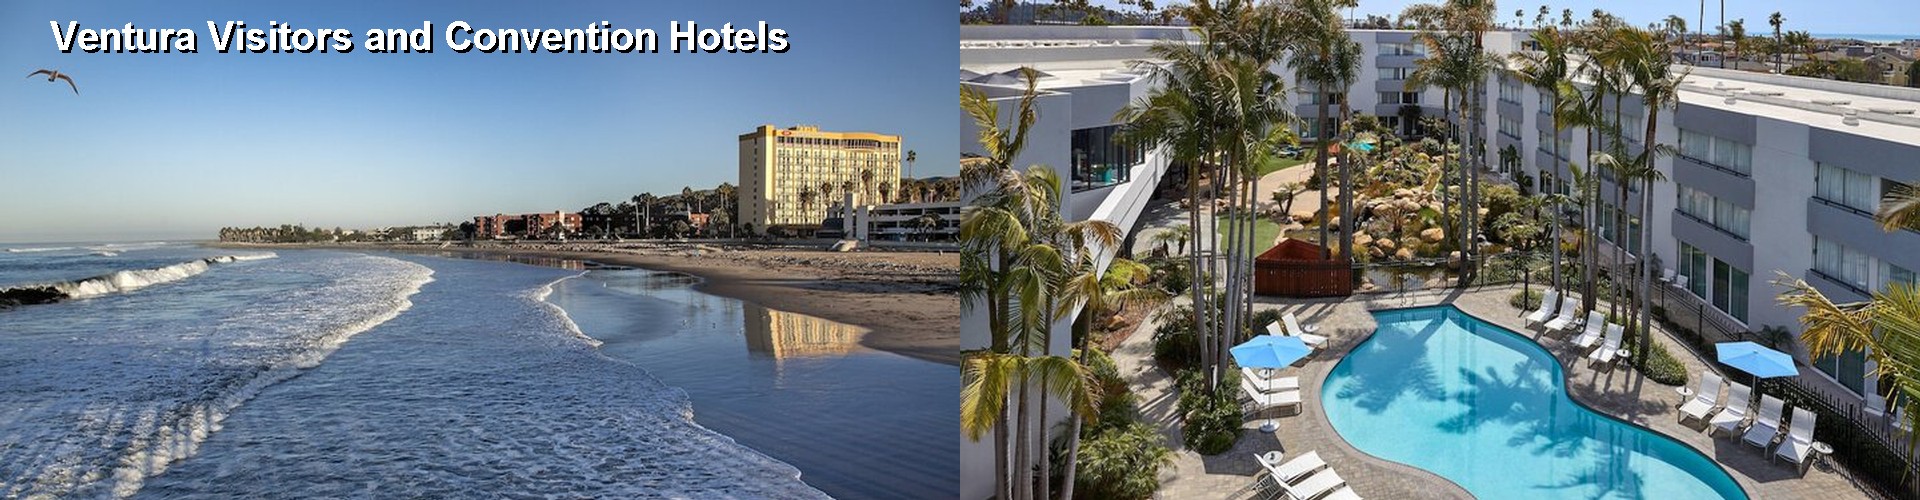 5 Best Hotels near Ventura Visitors and Convention